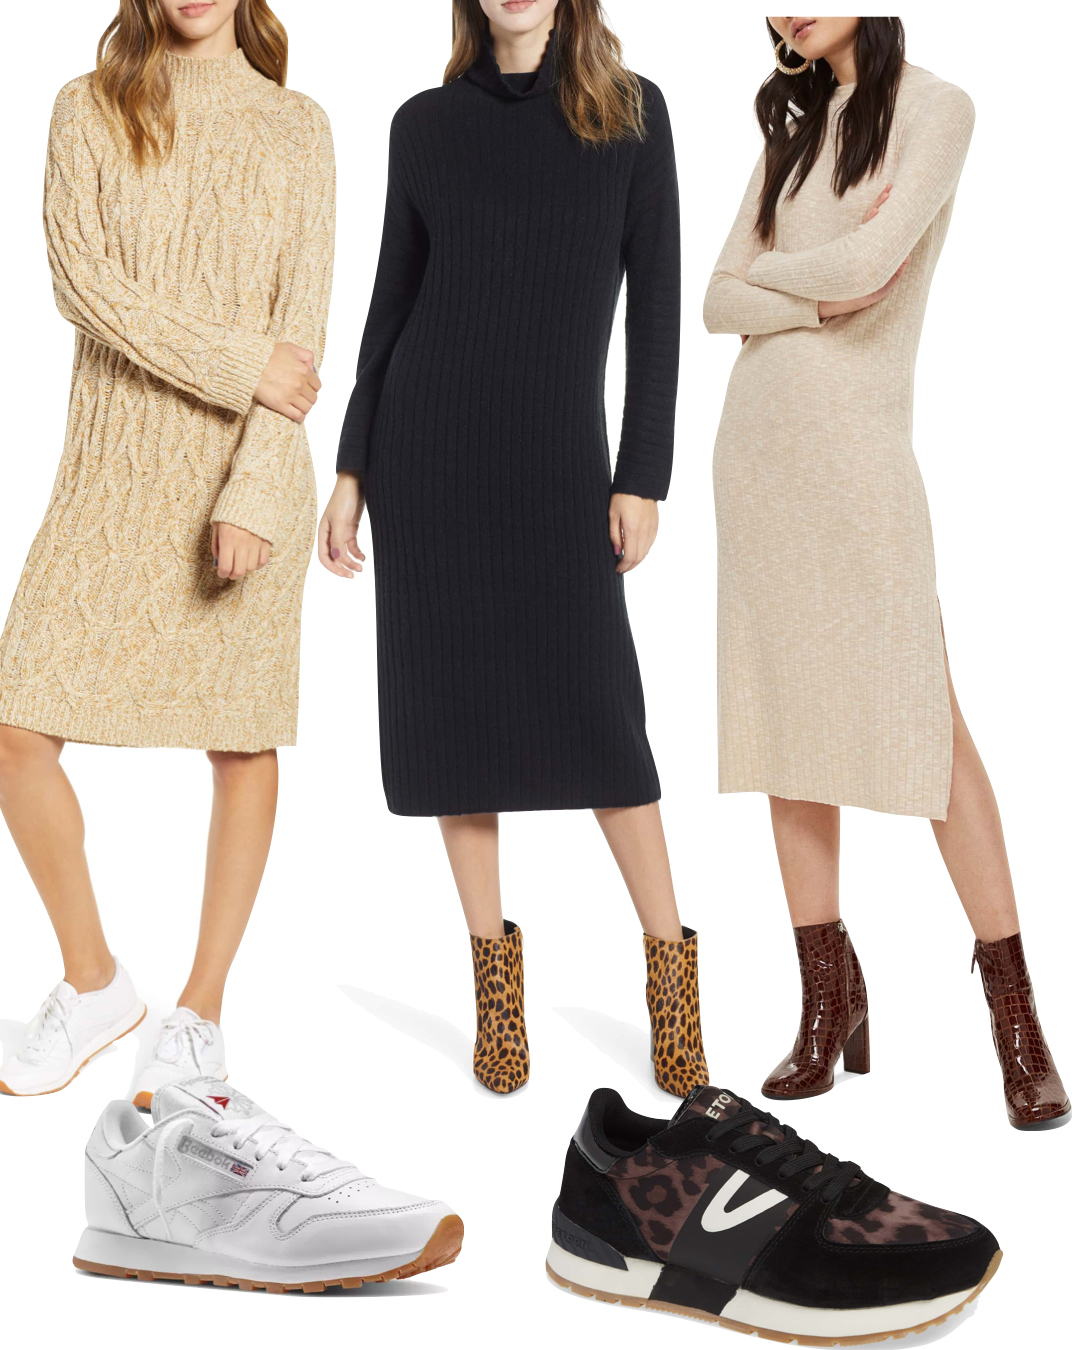 shoes to wear with jumper dress